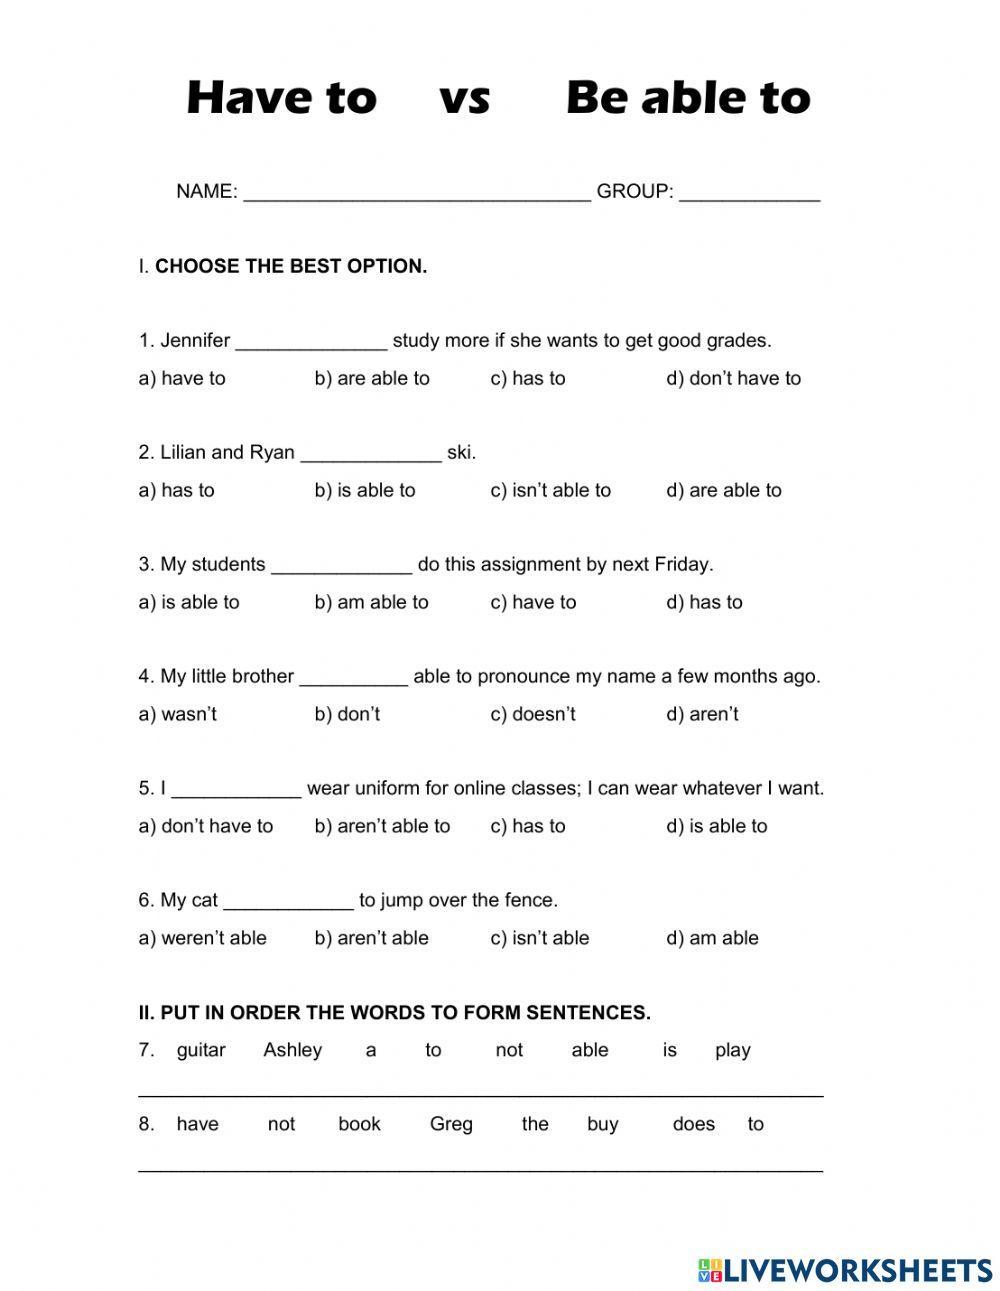 Have to - Be able to worksheet | Live Worksheets